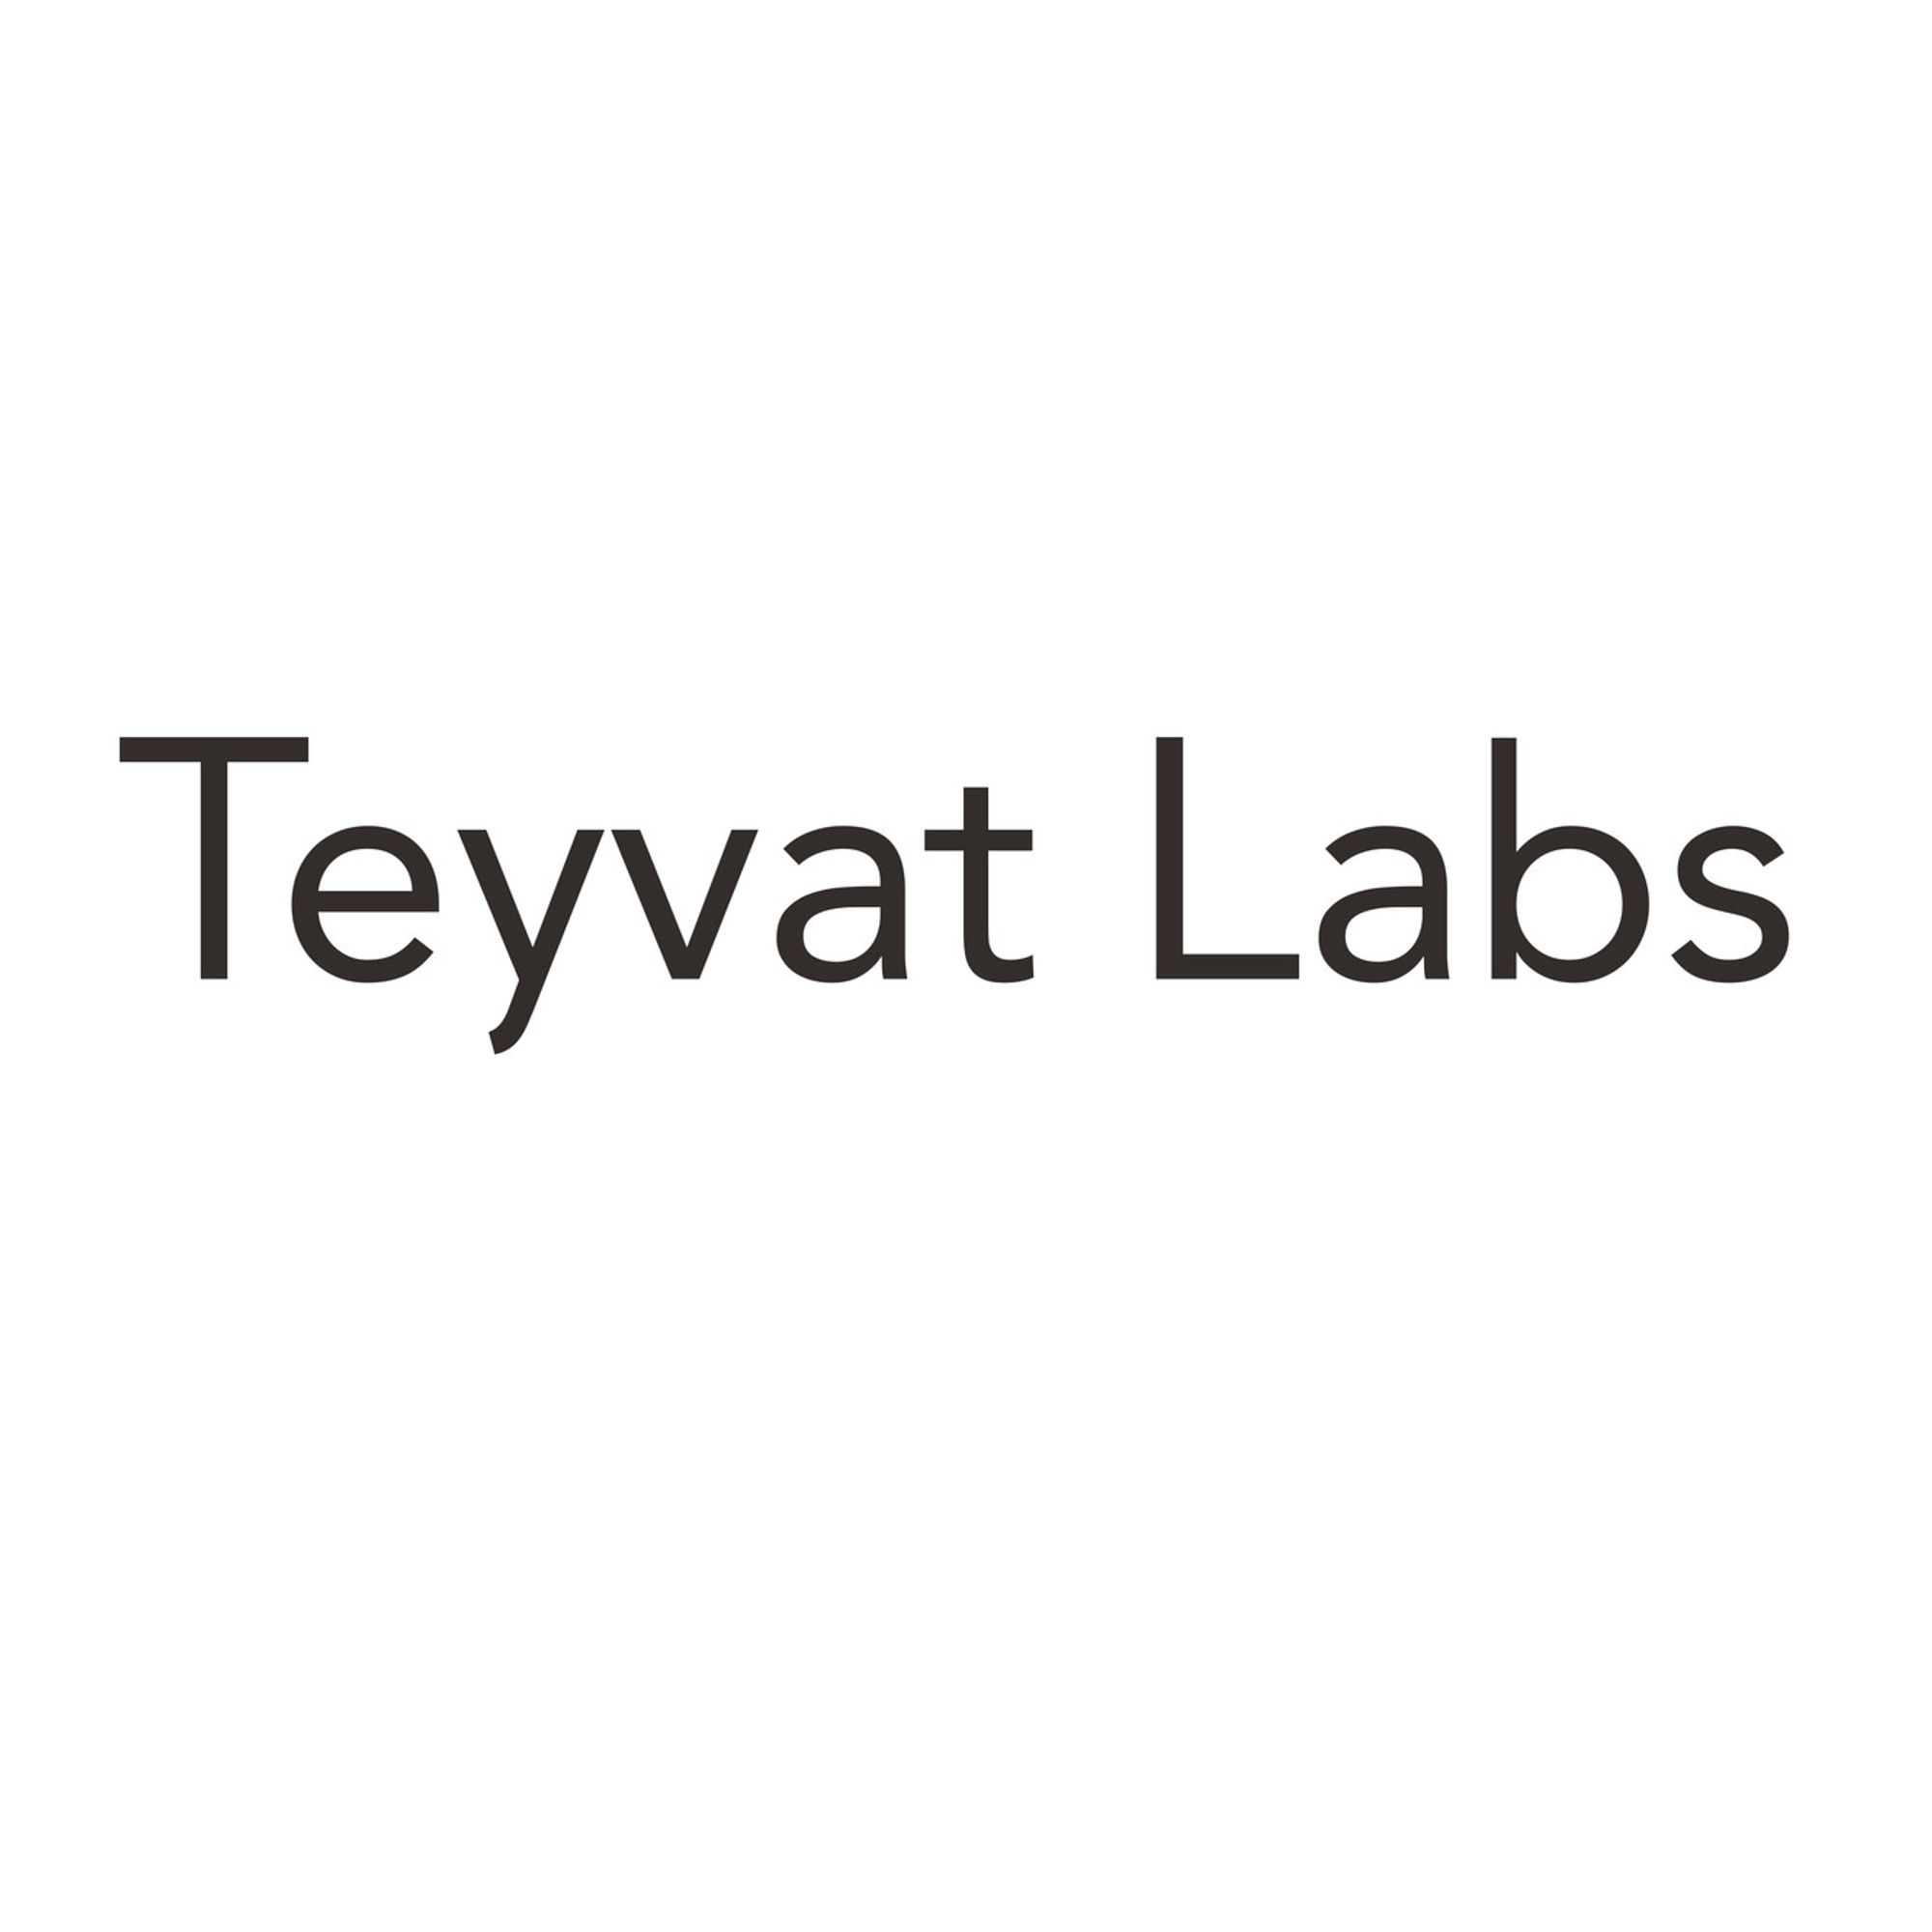 Teyvat Labs | Research for technology driven investment